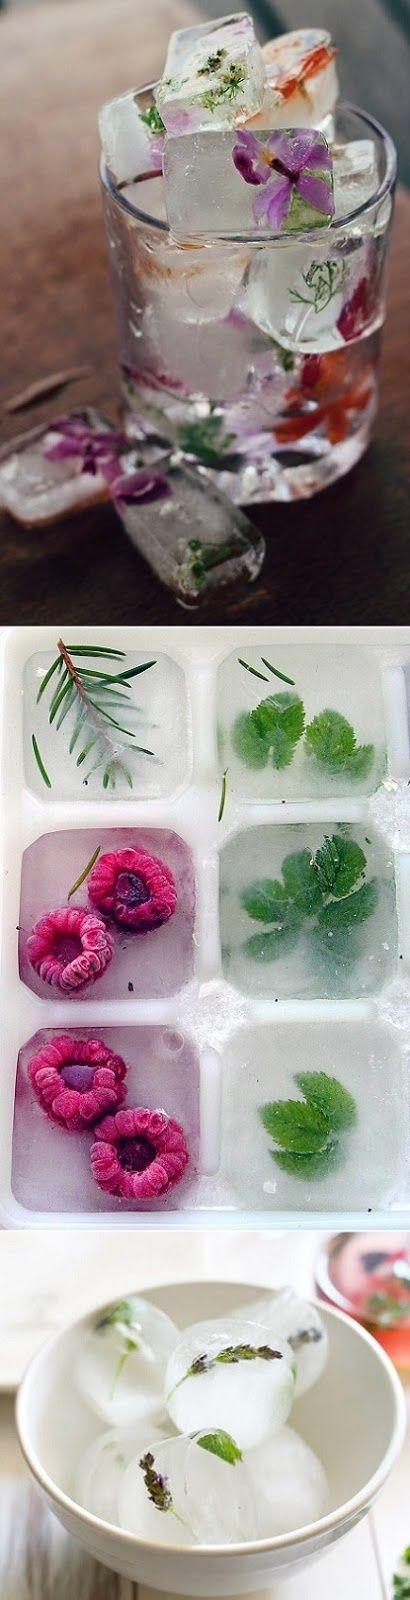 Wedding - How To Make Floral, Fruit, And Herb Ice Cubes